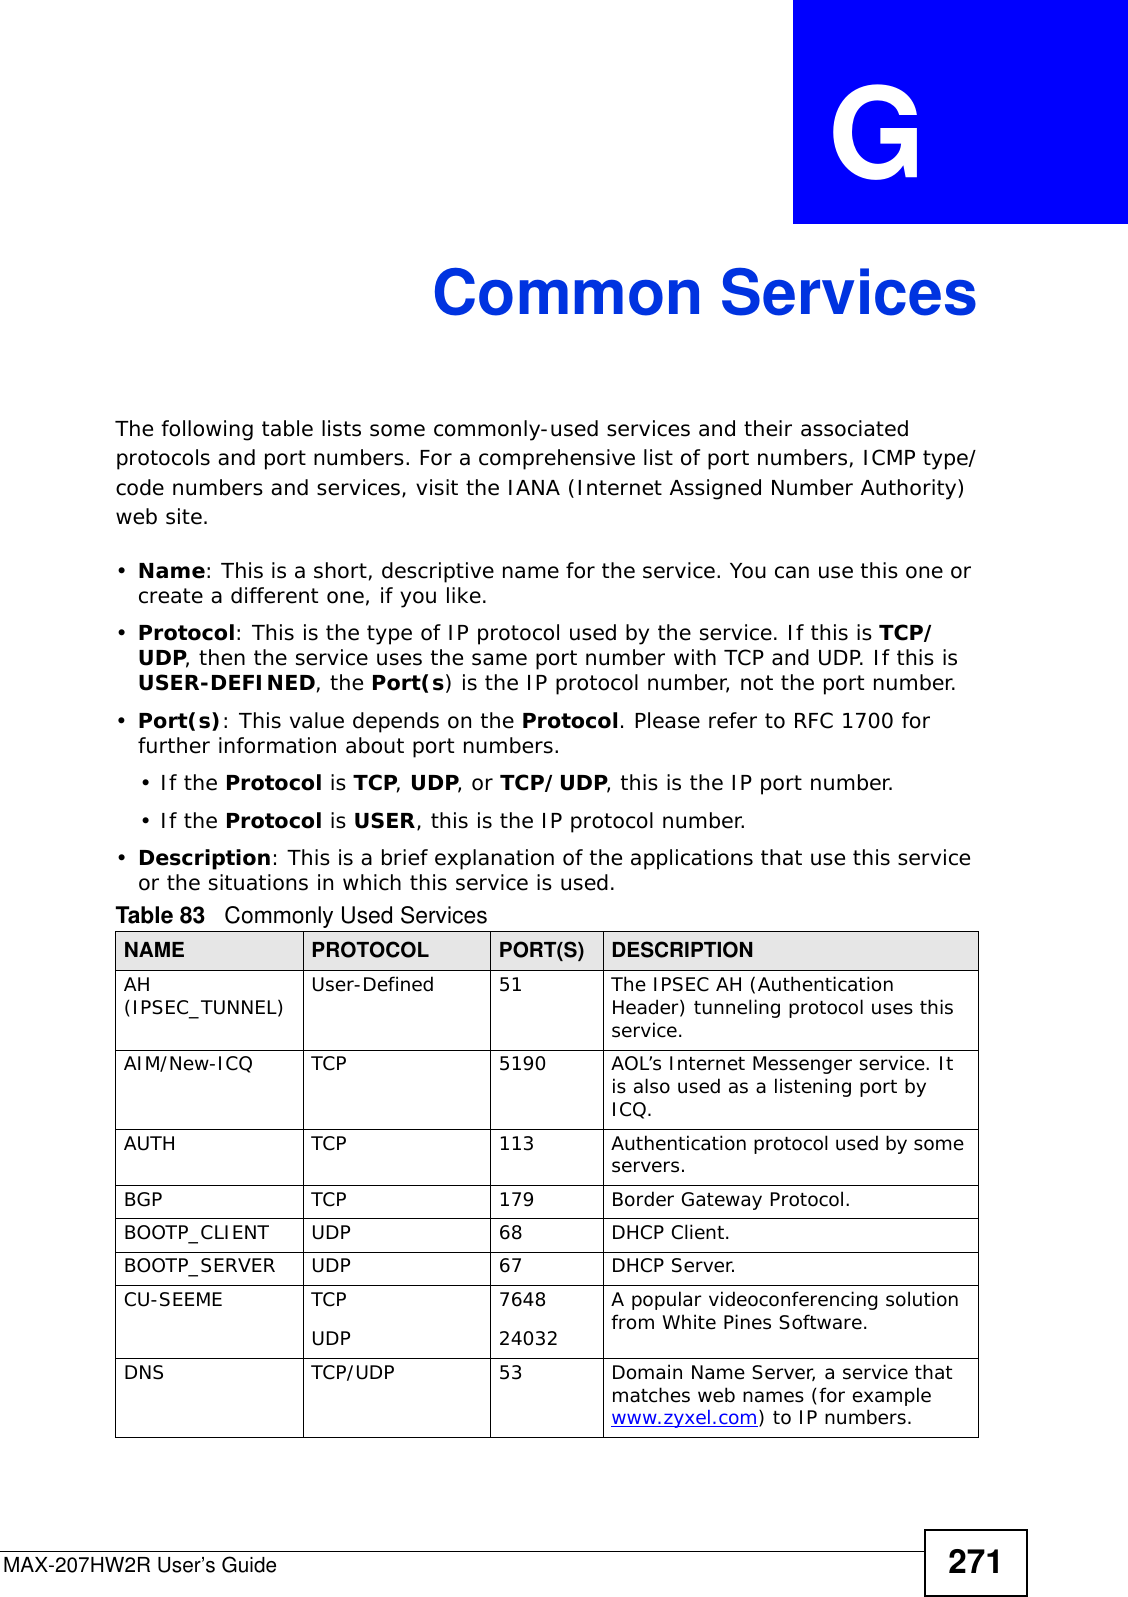 MAX-207HW2R User’s Guide 271APPENDIX  G Common ServicesThe following table lists some commonly-used services and their associated protocols and port numbers. For a comprehensive list of port numbers, ICMP type/code numbers and services, visit the IANA (Internet Assigned Number Authority) web site. •Name: This is a short, descriptive name for the service. You can use this one or create a different one, if you like.•Protocol: This is the type of IP protocol used by the service. If this is TCP/UDP, then the service uses the same port number with TCP and UDP. If this is USER-DEFINED, the Port(s) is the IP protocol number, not the port number.•Port(s): This value depends on the Protocol. Please refer to RFC 1700 for further information about port numbers.•If the Protocol is TCP, UDP, or TCP/UDP, this is the IP port number.•If the Protocol is USER, this is the IP protocol number.•Description: This is a brief explanation of the applications that use this service or the situations in which this service is used.Table 83   Commonly Used ServicesNAME PROTOCOL PORT(S) DESCRIPTIONAH (IPSEC_TUNNEL) User-Defined 51 The IPSEC AH (Authentication Header) tunneling protocol uses this service.AIM/New-ICQ TCP 5190 AOL’s Internet Messenger service. It is also used as a listening port by ICQ.AUTH TCP 113 Authentication protocol used by some servers.BGP TCP 179 Border Gateway Protocol.BOOTP_CLIENT UDP 68 DHCP Client.BOOTP_SERVER UDP 67 DHCP Server.CU-SEEME TCPUDP764824032A popular videoconferencing solution from White Pines Software.DNS TCP/UDP 53 Domain Name Server, a service that matches web names (for example www.zyxel.com) to IP numbers.